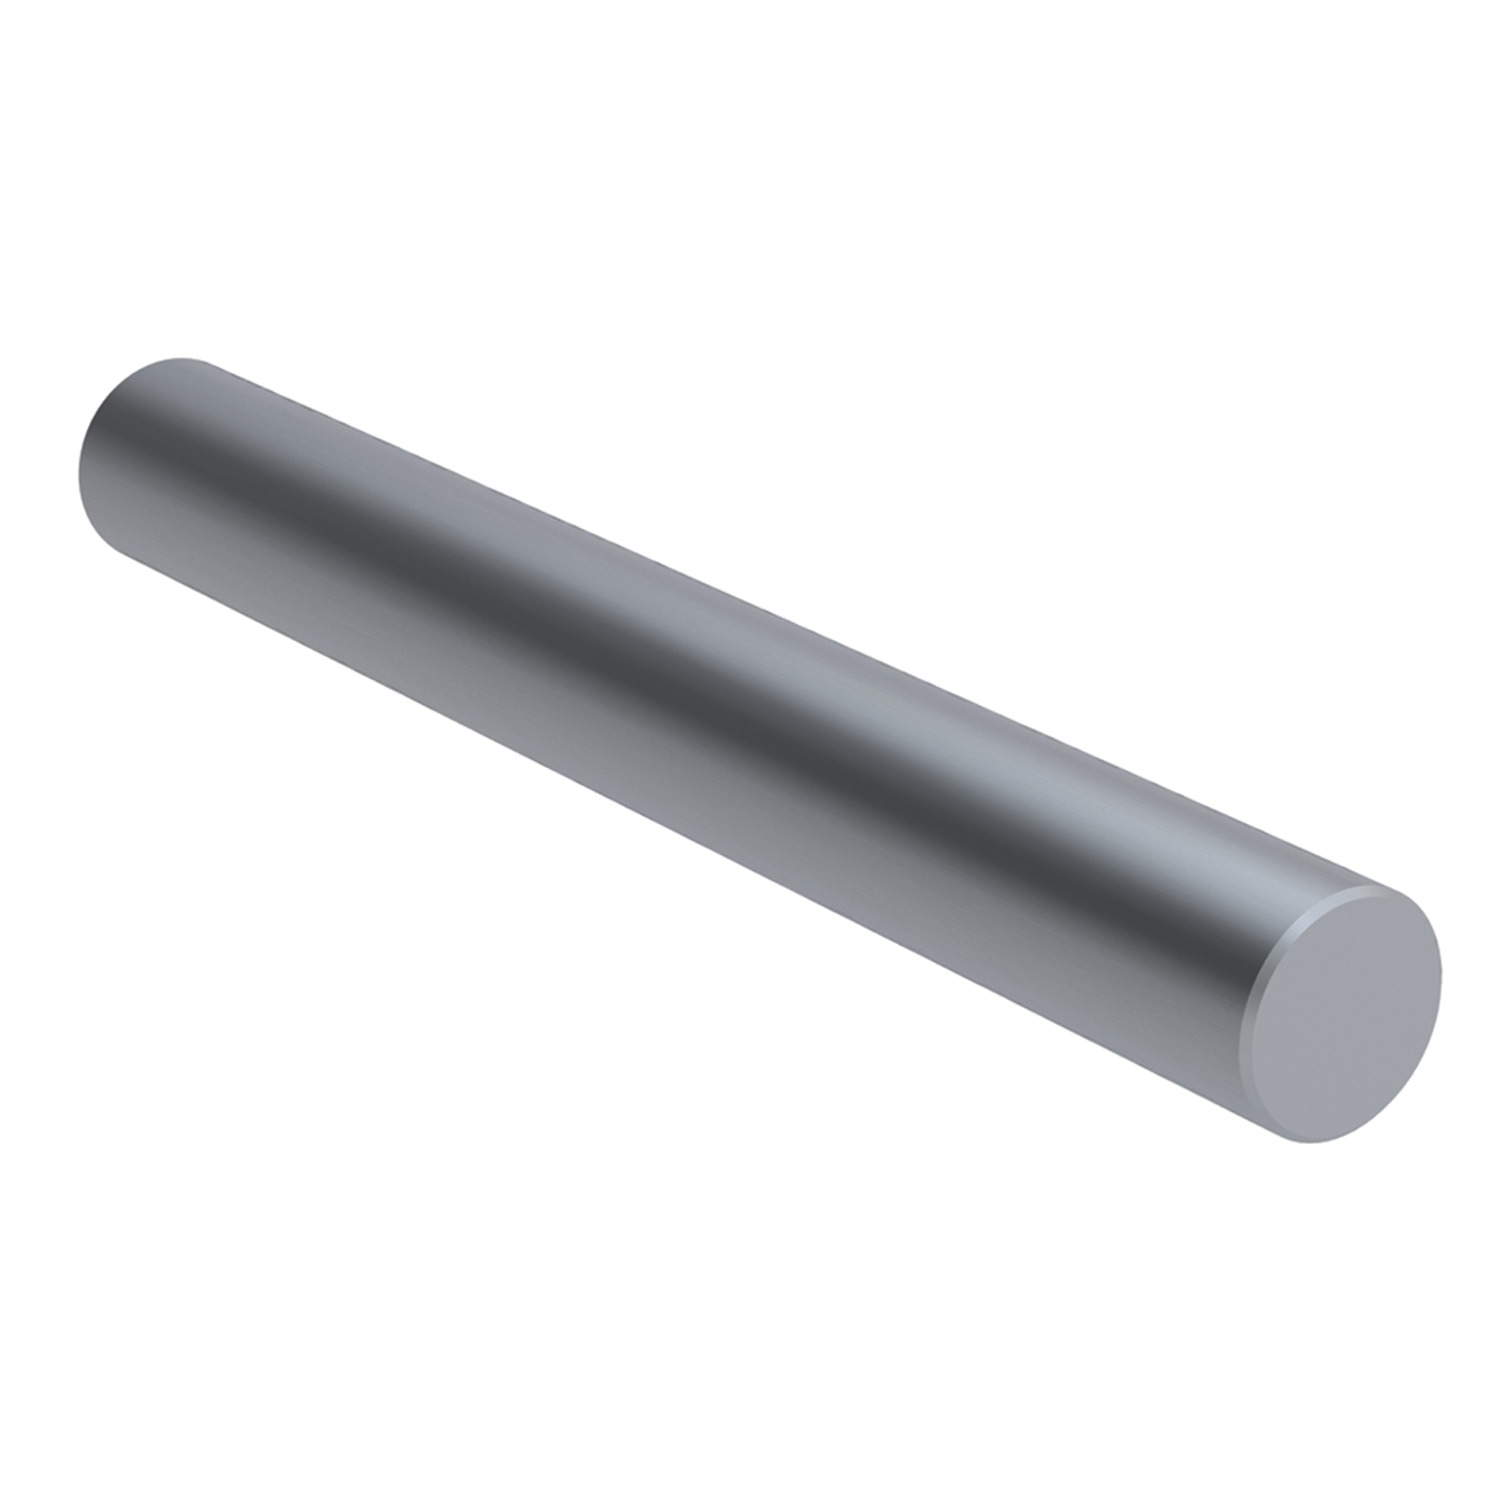 Product L1772.12, Ø12 Hardened Stainless Shafts for linear bearings / 